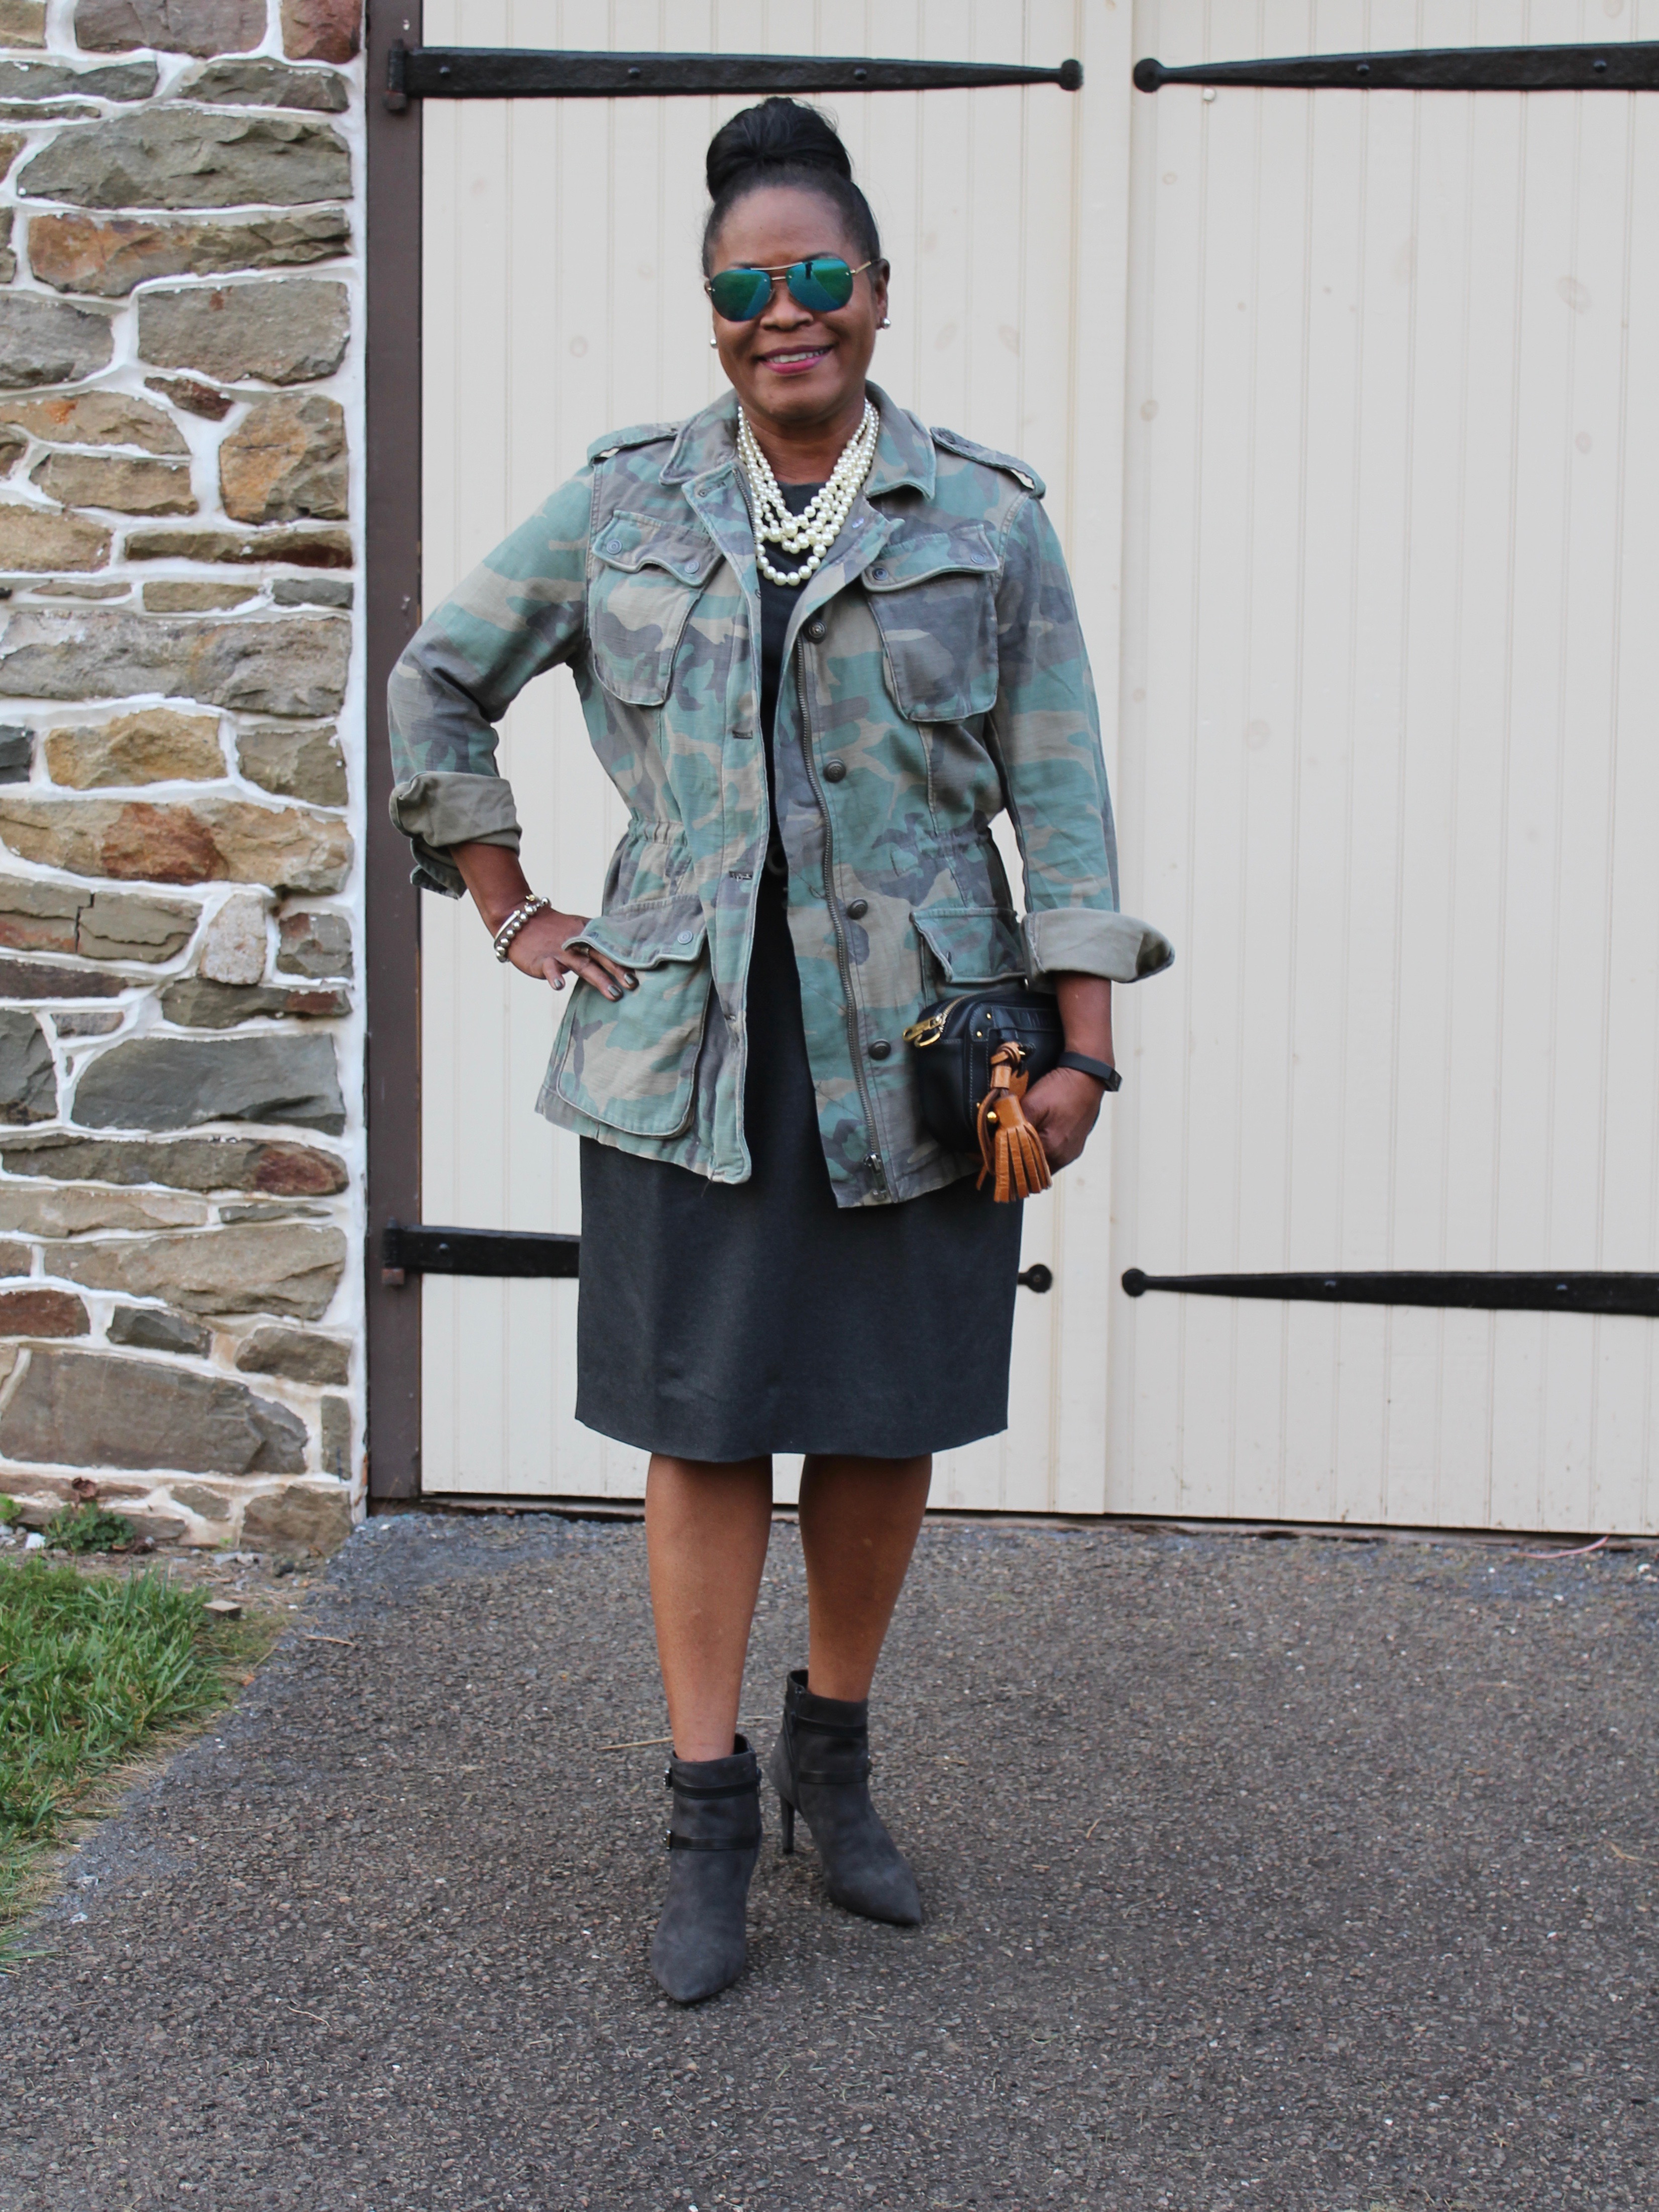 Wearing: Free People Not Your Bros. Camouflage Miltary Jacket, old Lafayette 148 New York Grey Wool Dress, Michael Micheal Kors Grey Fawn Suede Booties with vintage Chloé.